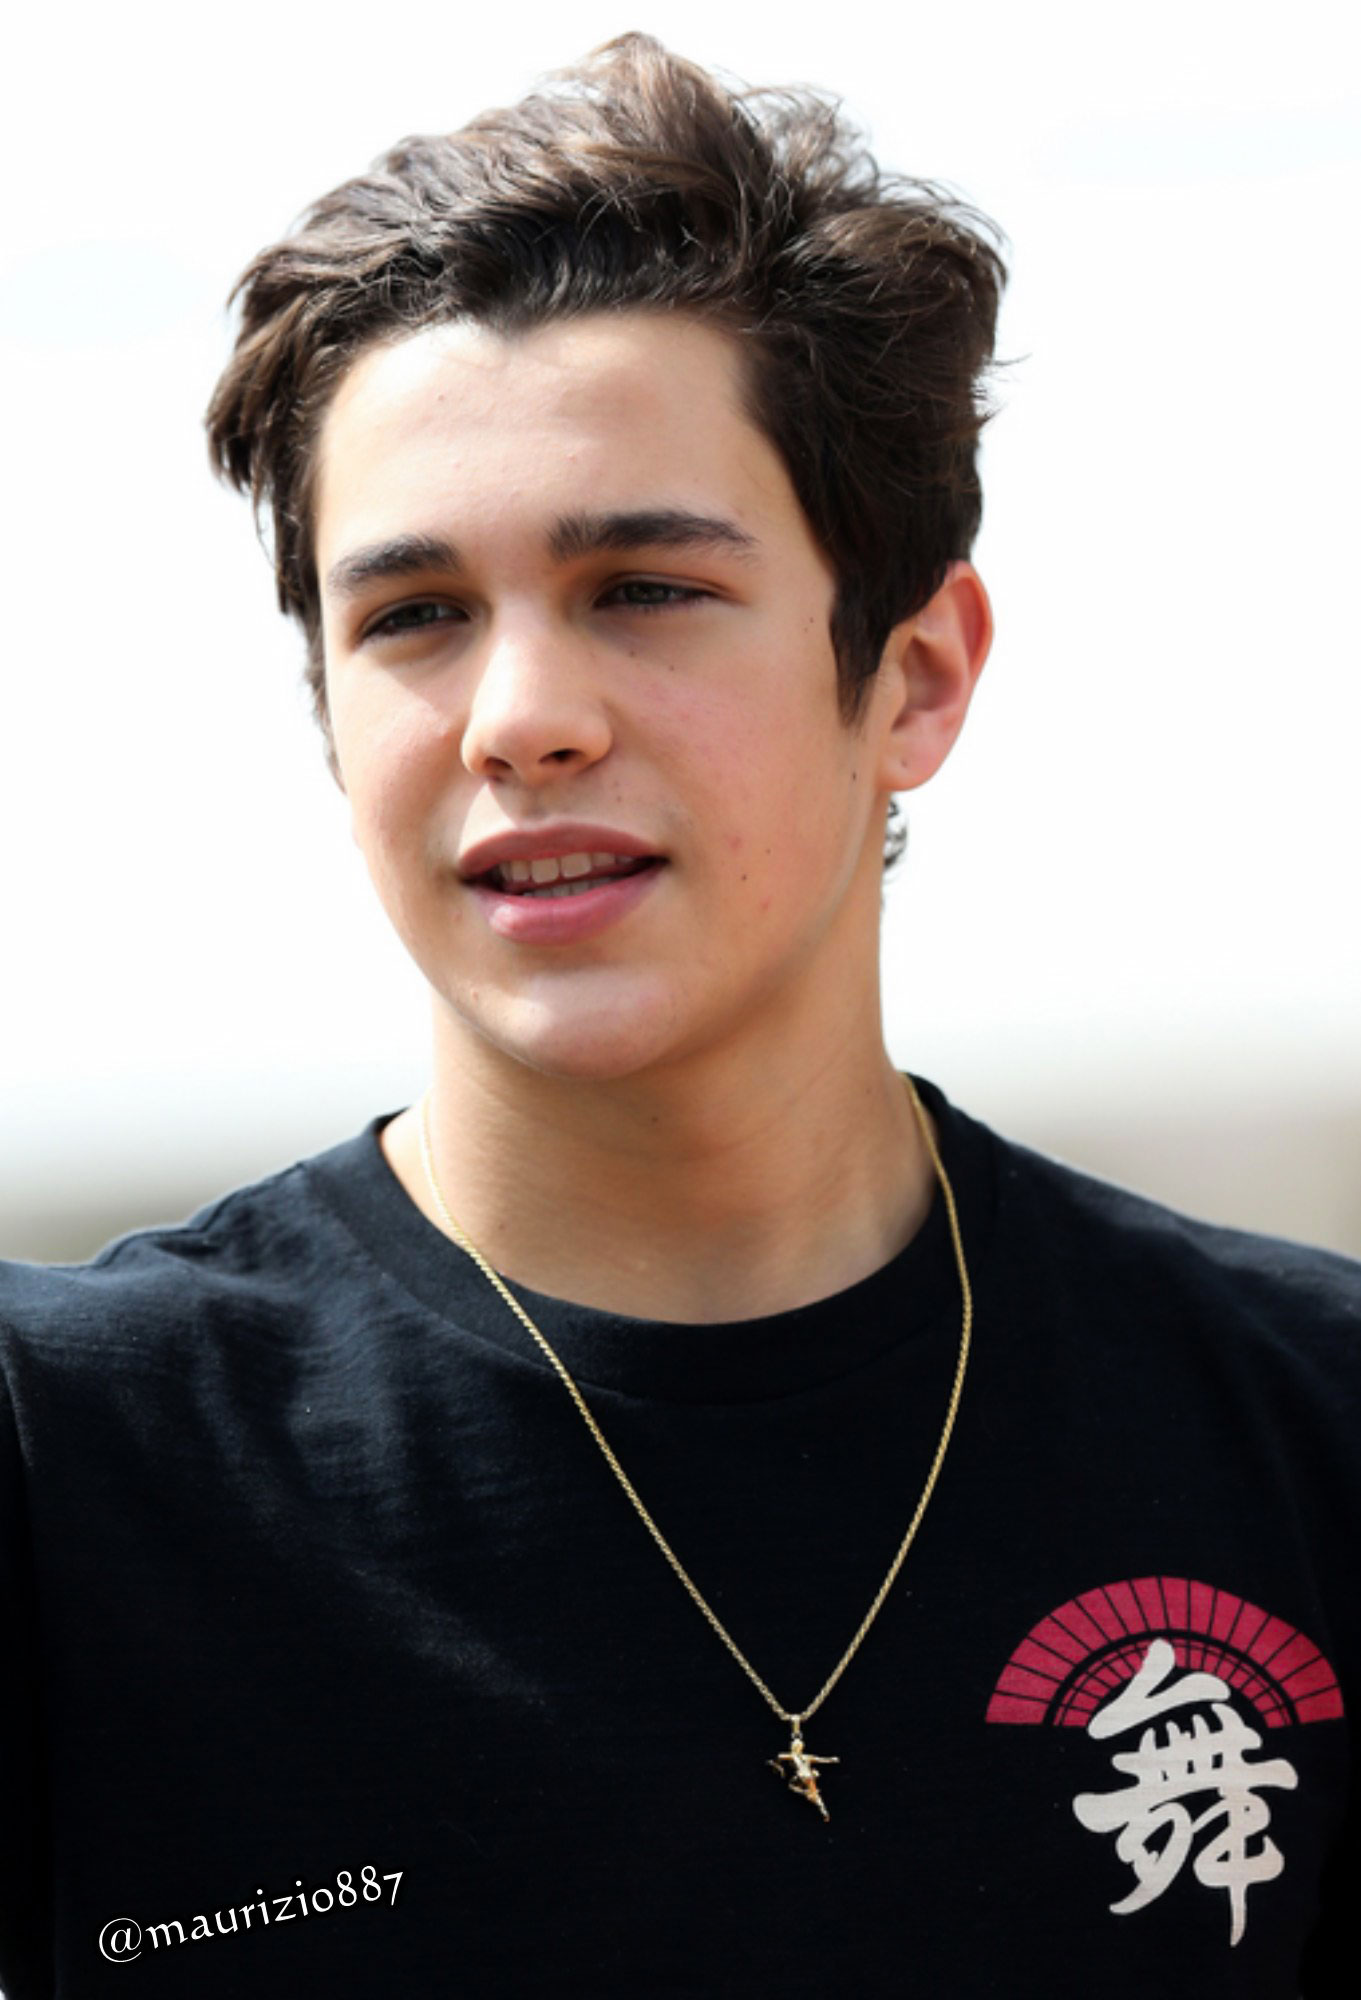 Austin Mahone Image HD Wallpaper And Background